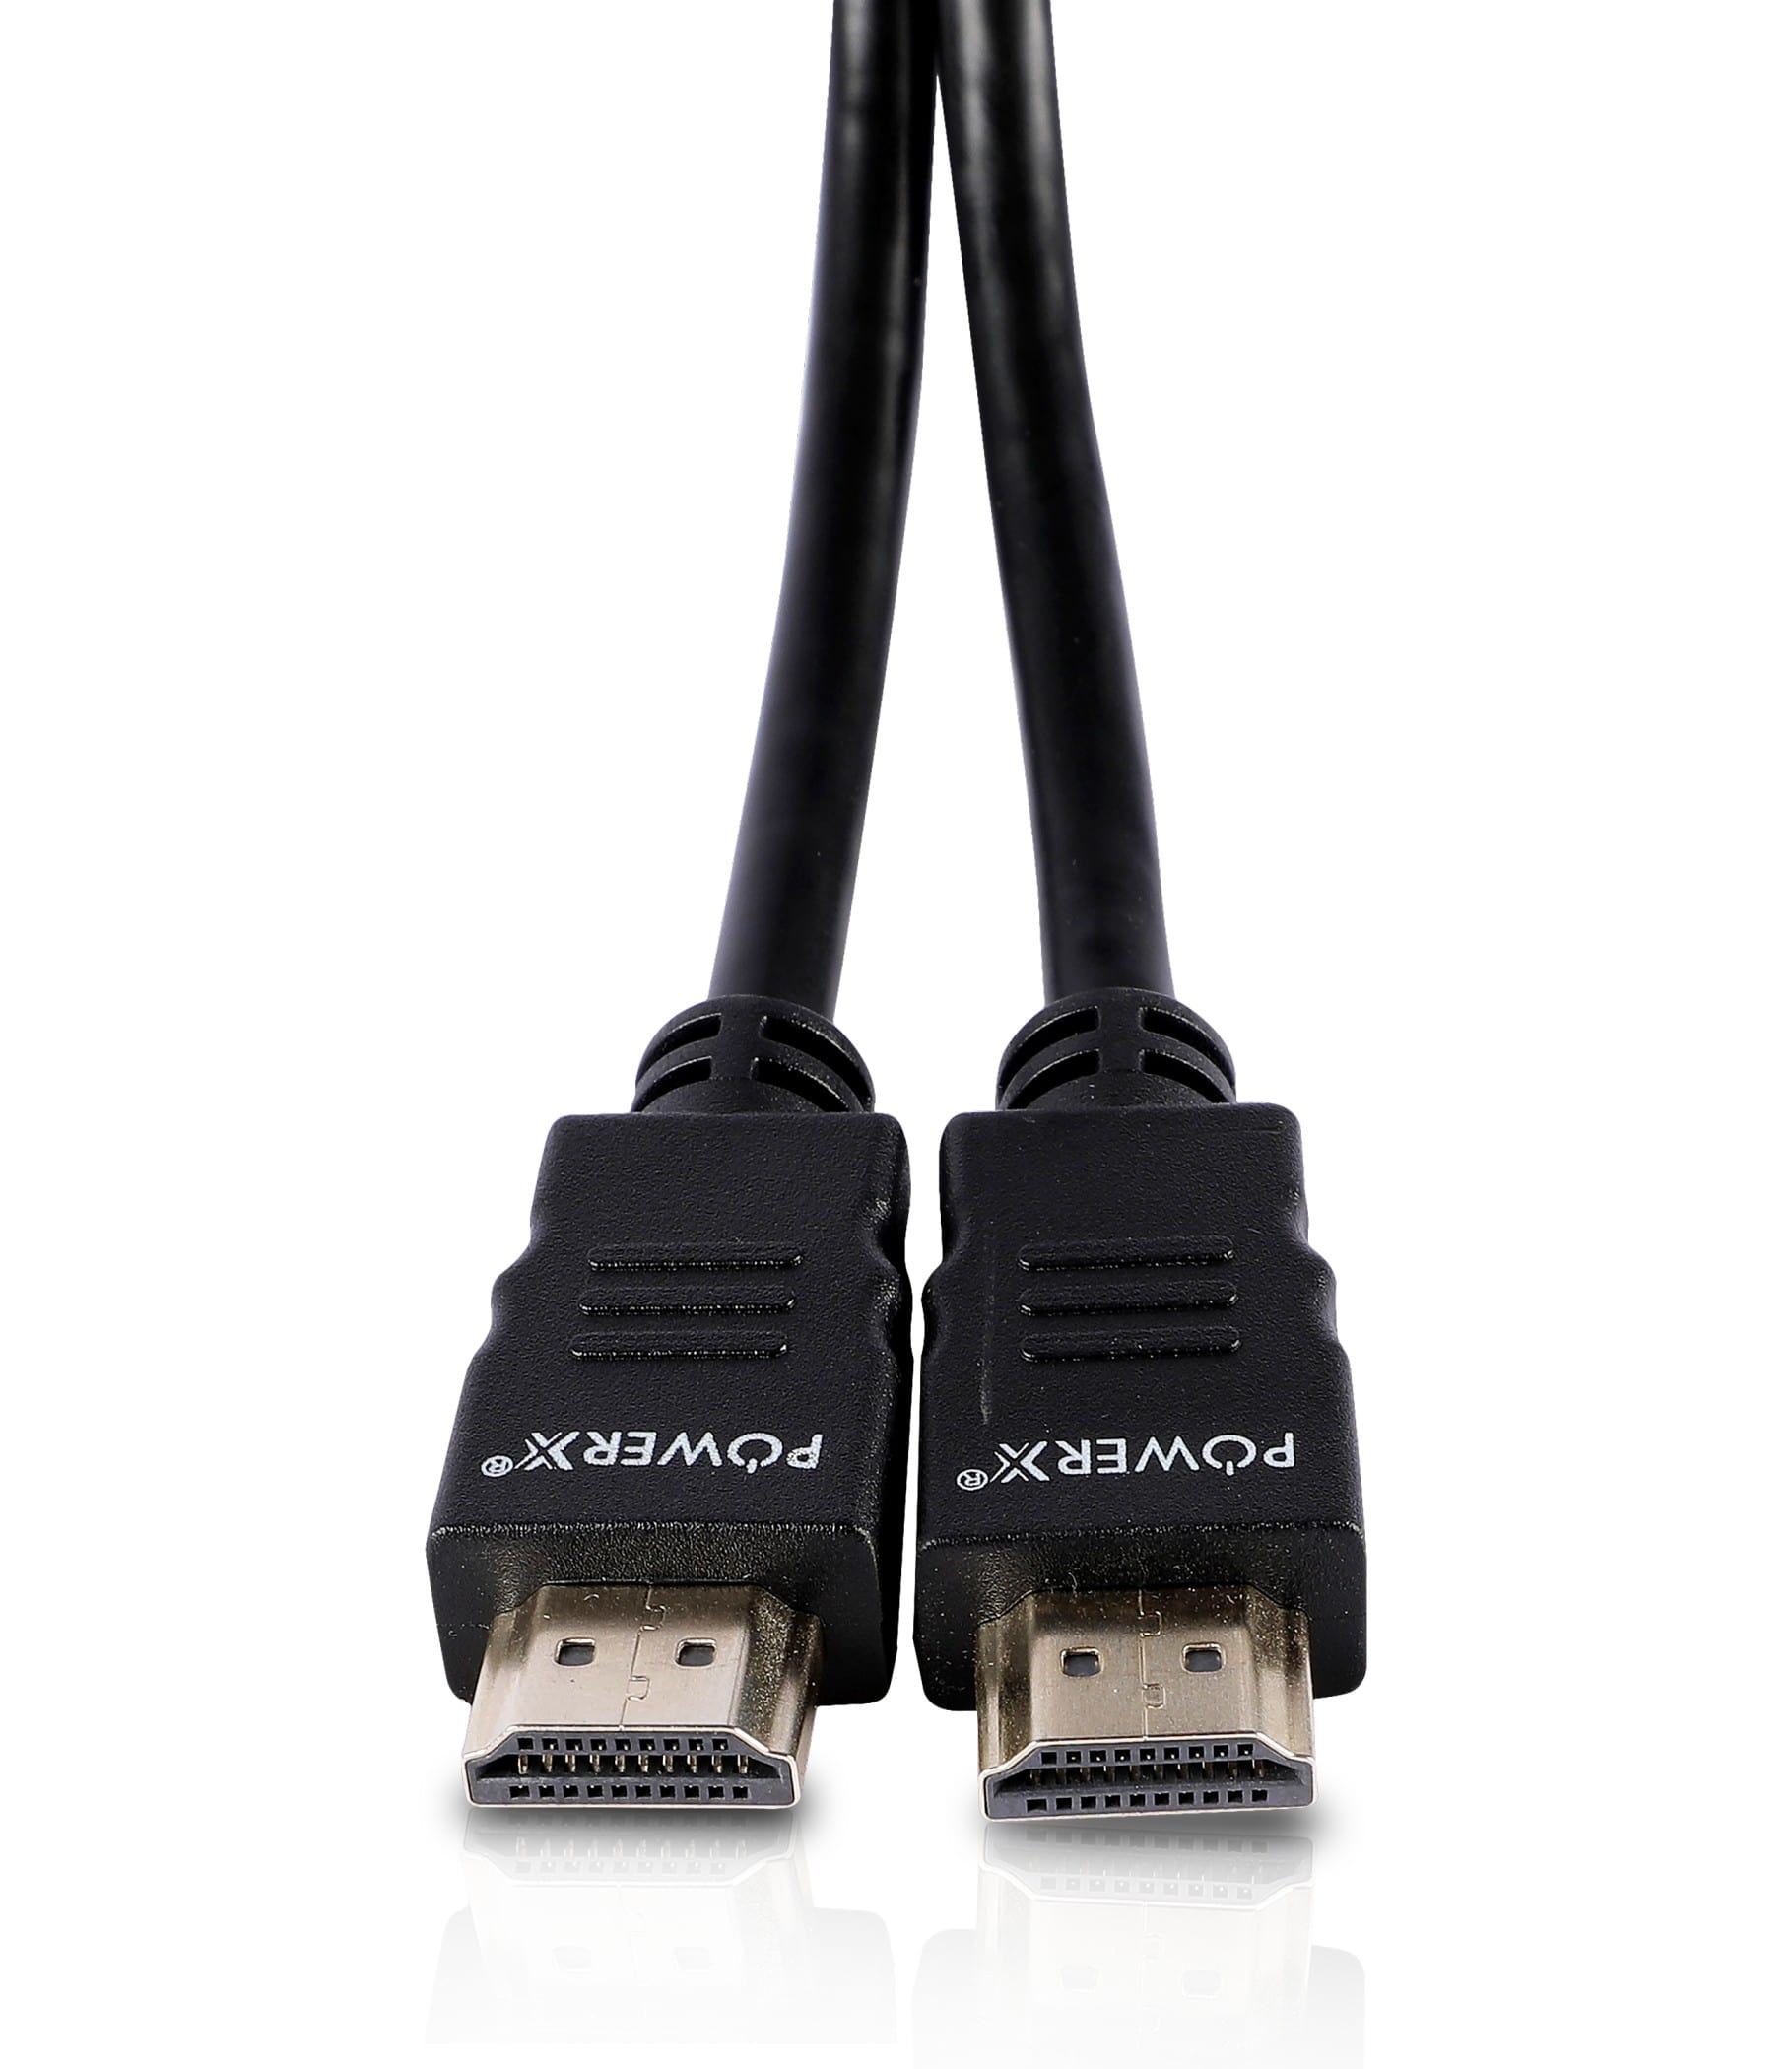 HDMI TO HDMI CABLE 3 METER